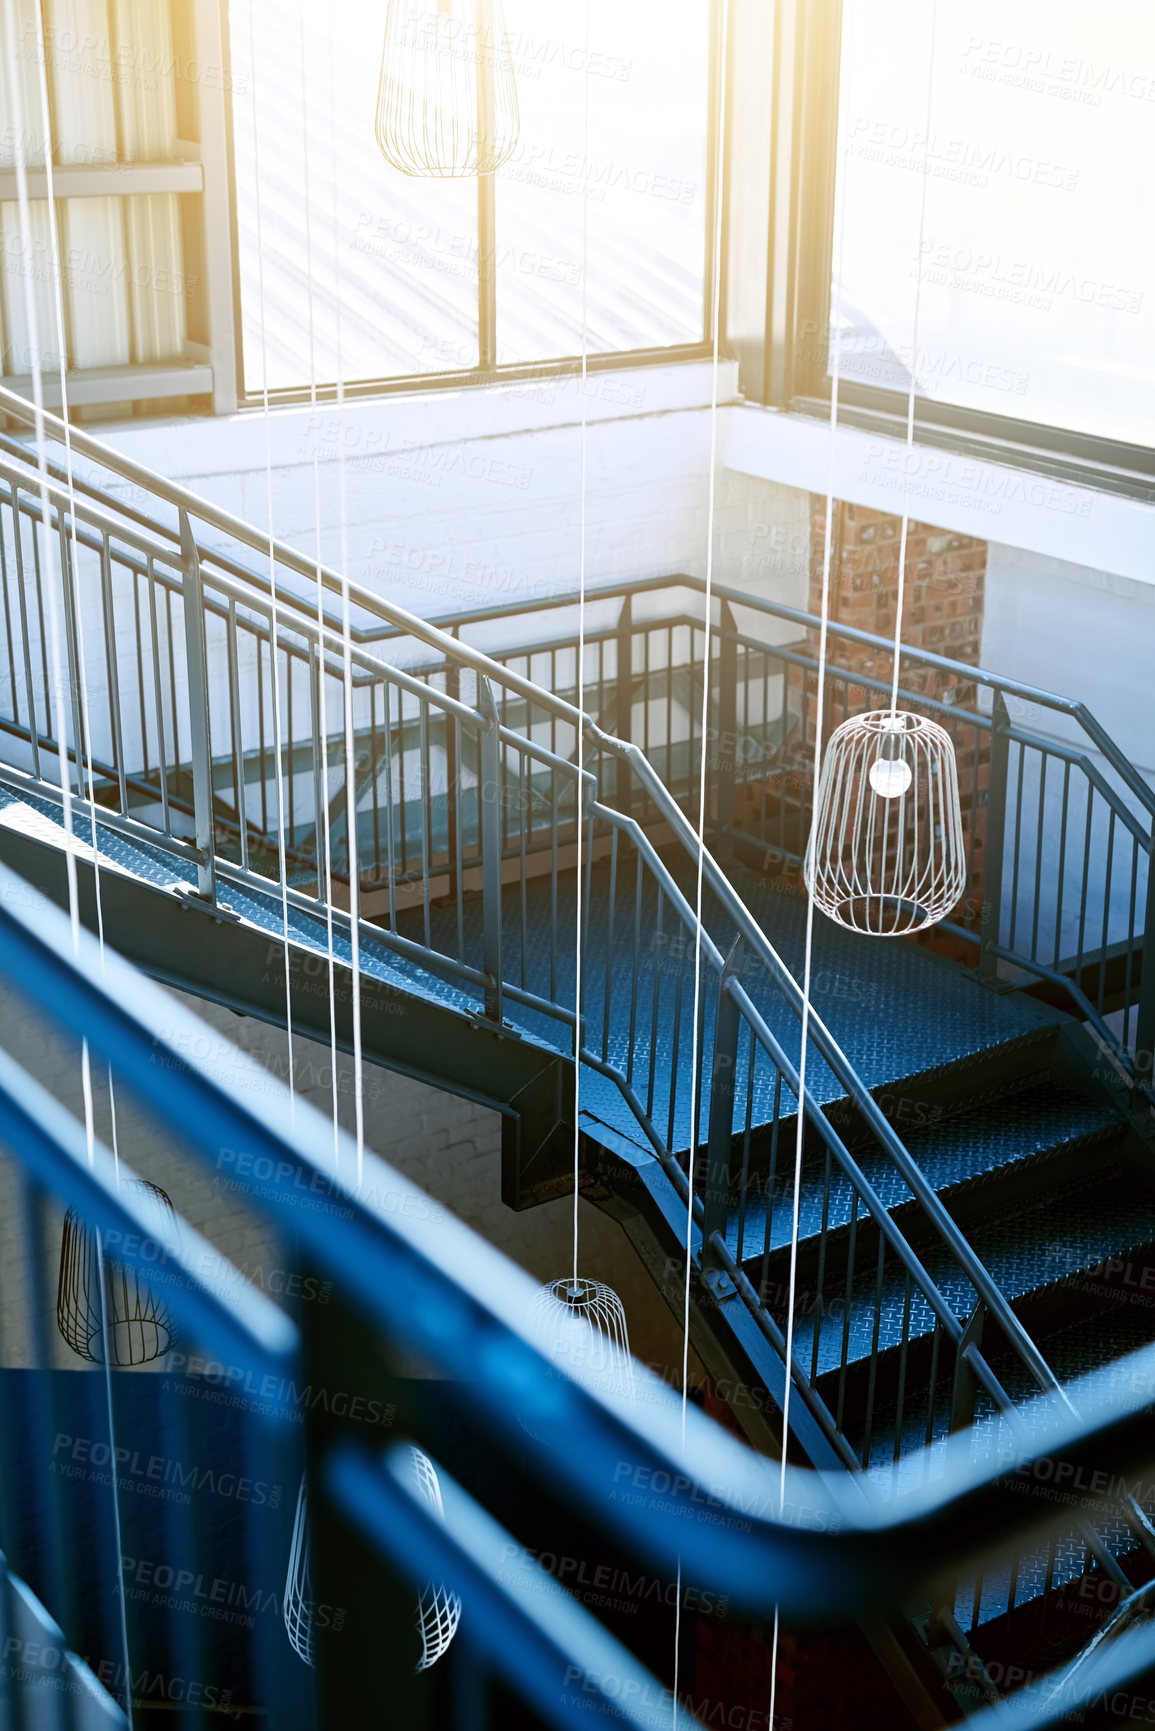 Buy stock photo Shot of a staircase in a building